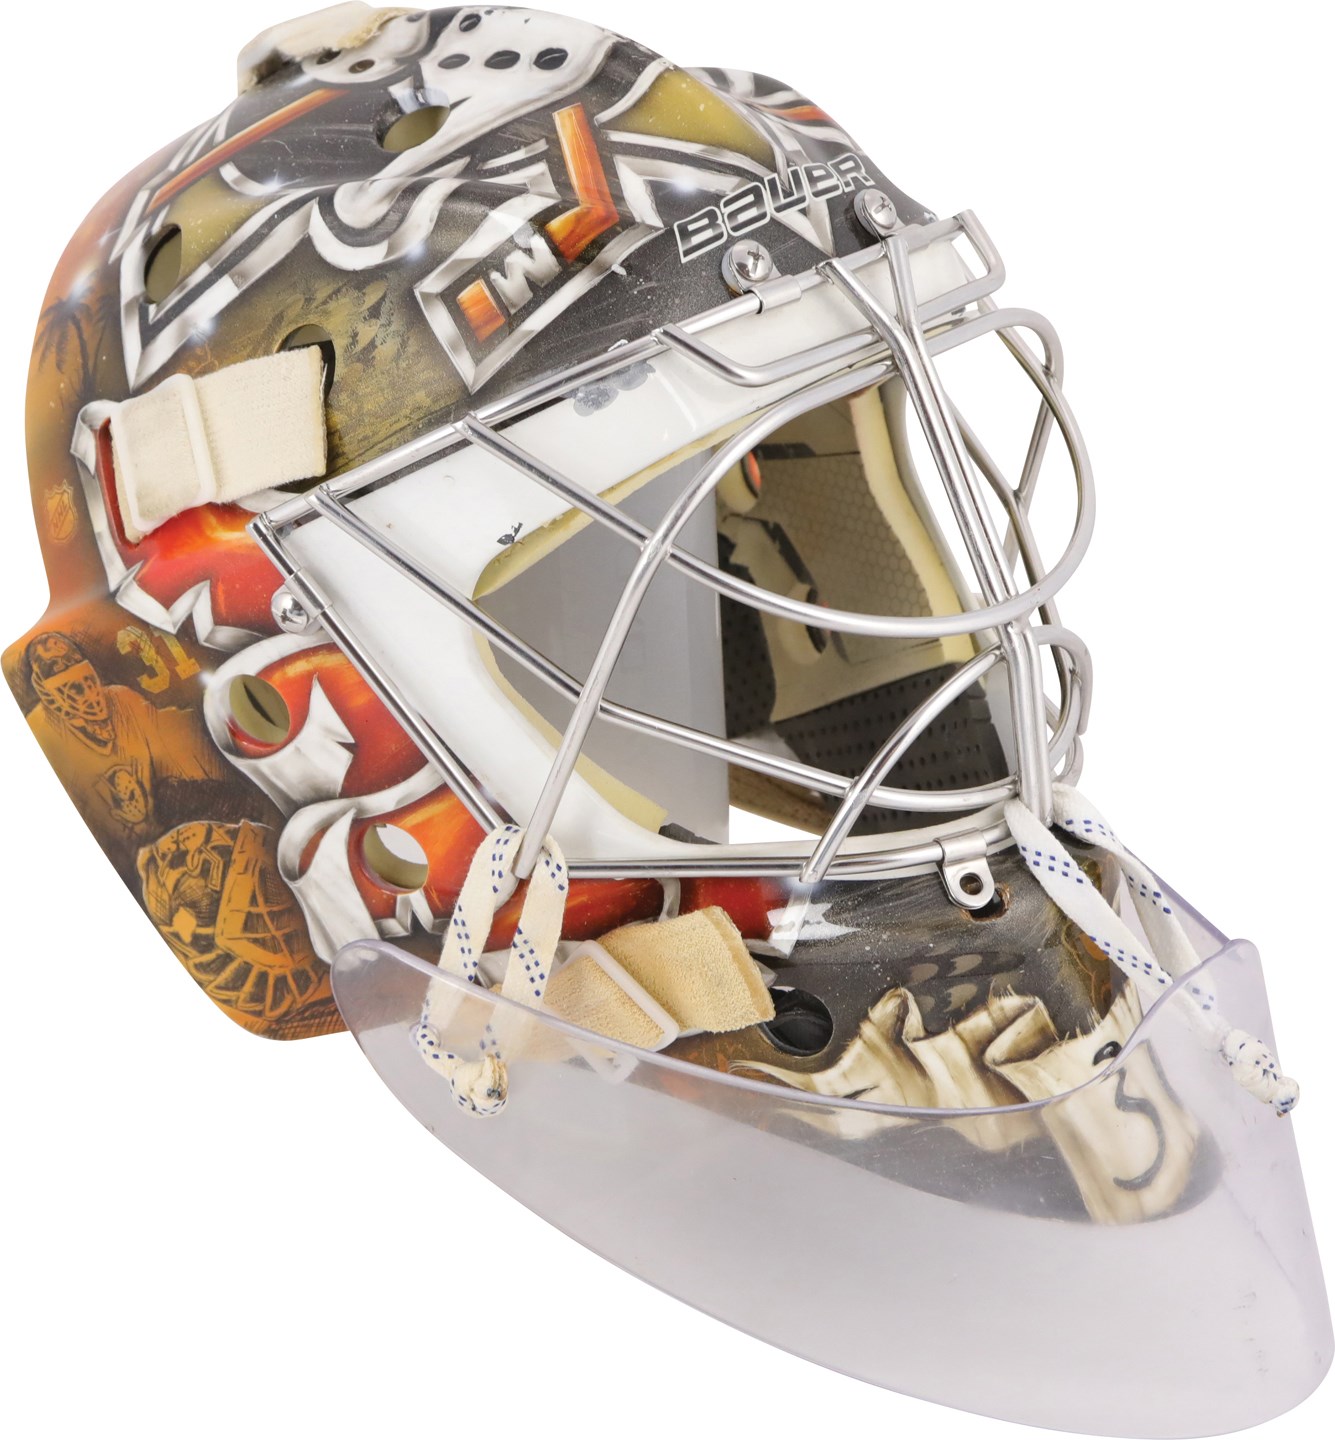 Hockey - 2016-17 John Gibson Season-Long Anaheim Ducks Game Worn Goalie's Mask Photo-Matched to (68) Games - 51 of 52 Regular Season and ALL Playoff Games! (Photo-Matched)